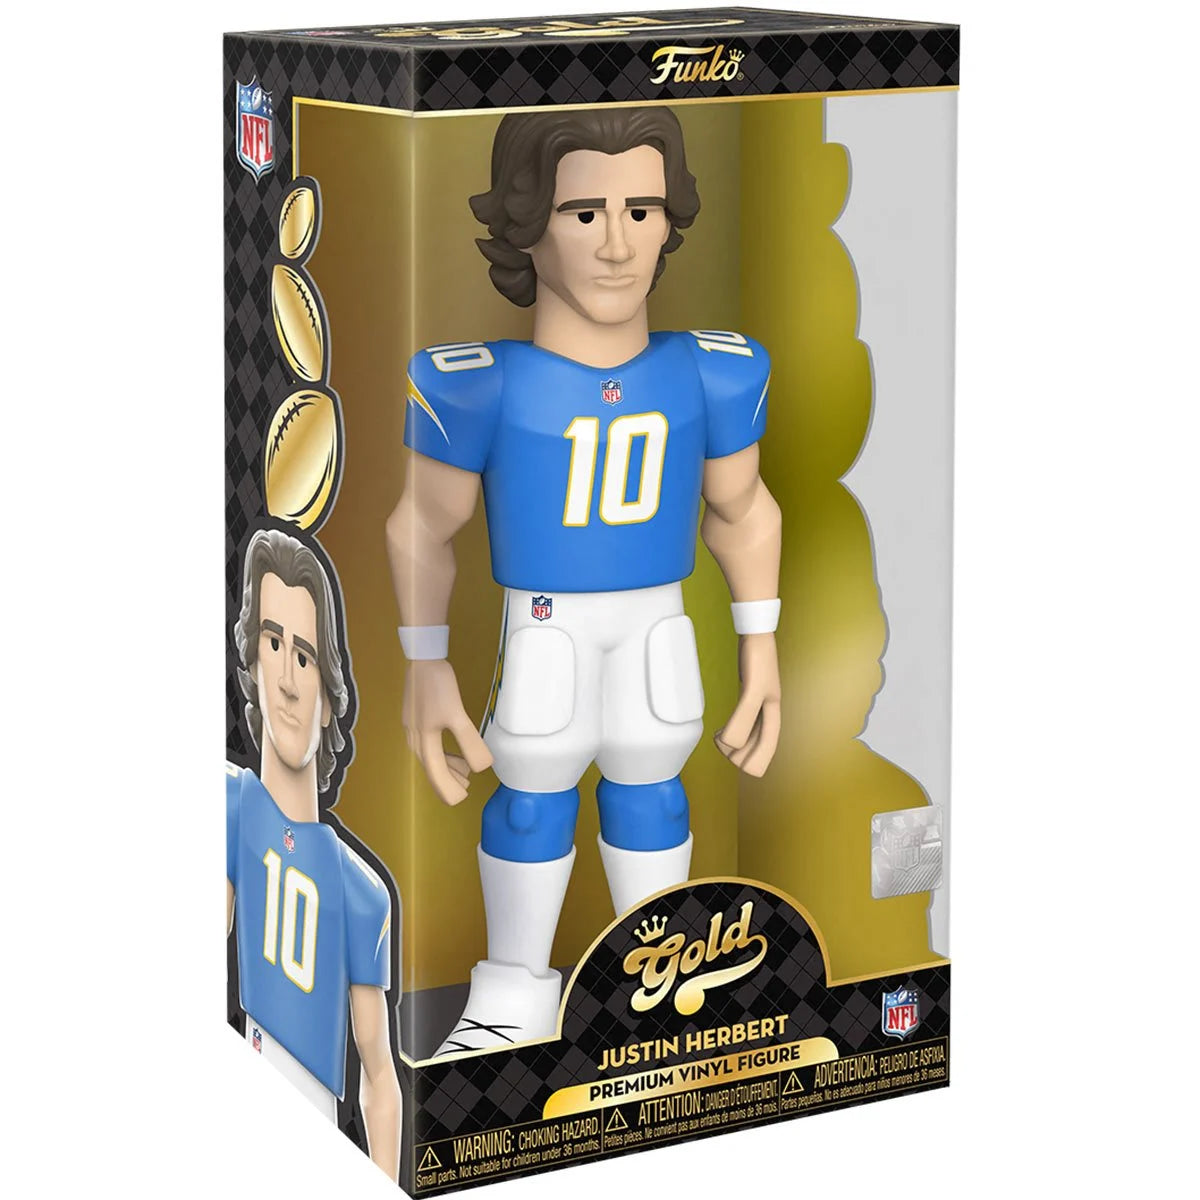 Justin Herbert Chargers NFL 12-Inch Funko Vinyl Gold Figure w/ Chance of chase!